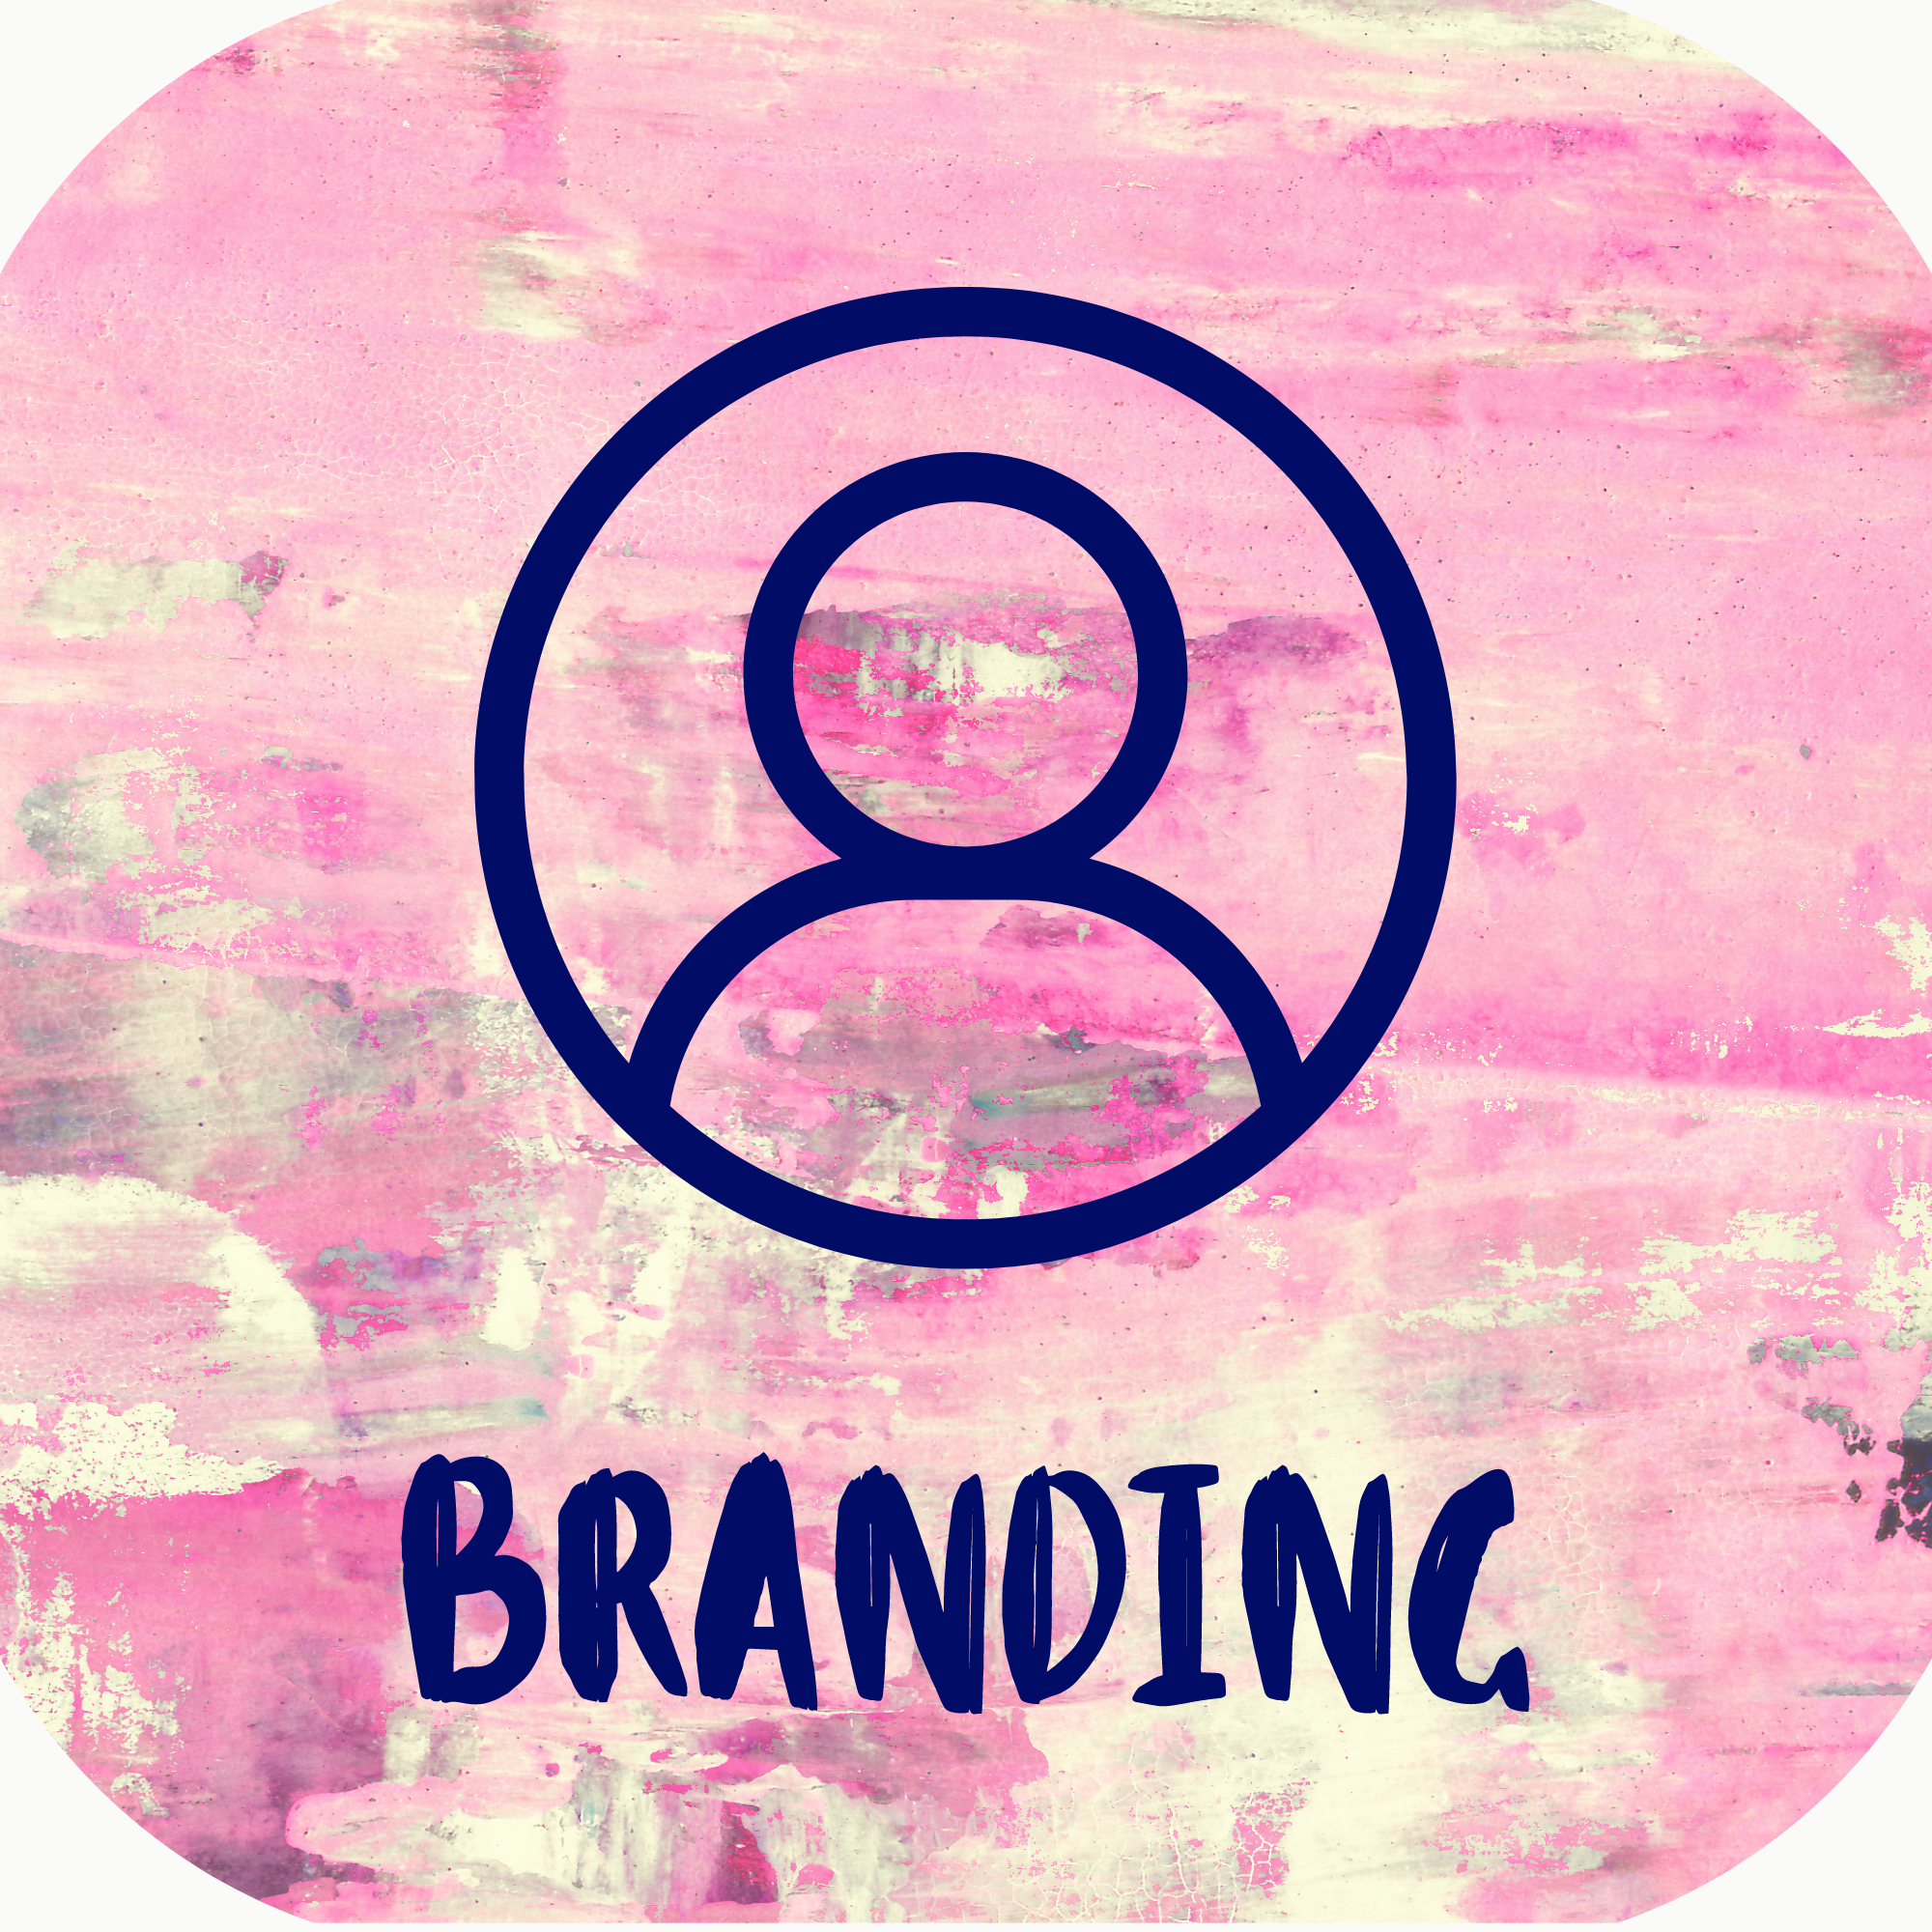 Branding icon with a pink, beige, and navy blue paint brushed background and a person inside a circle logo inside reading Branding below the icon. The icon leads users to Ava's branding portfolio